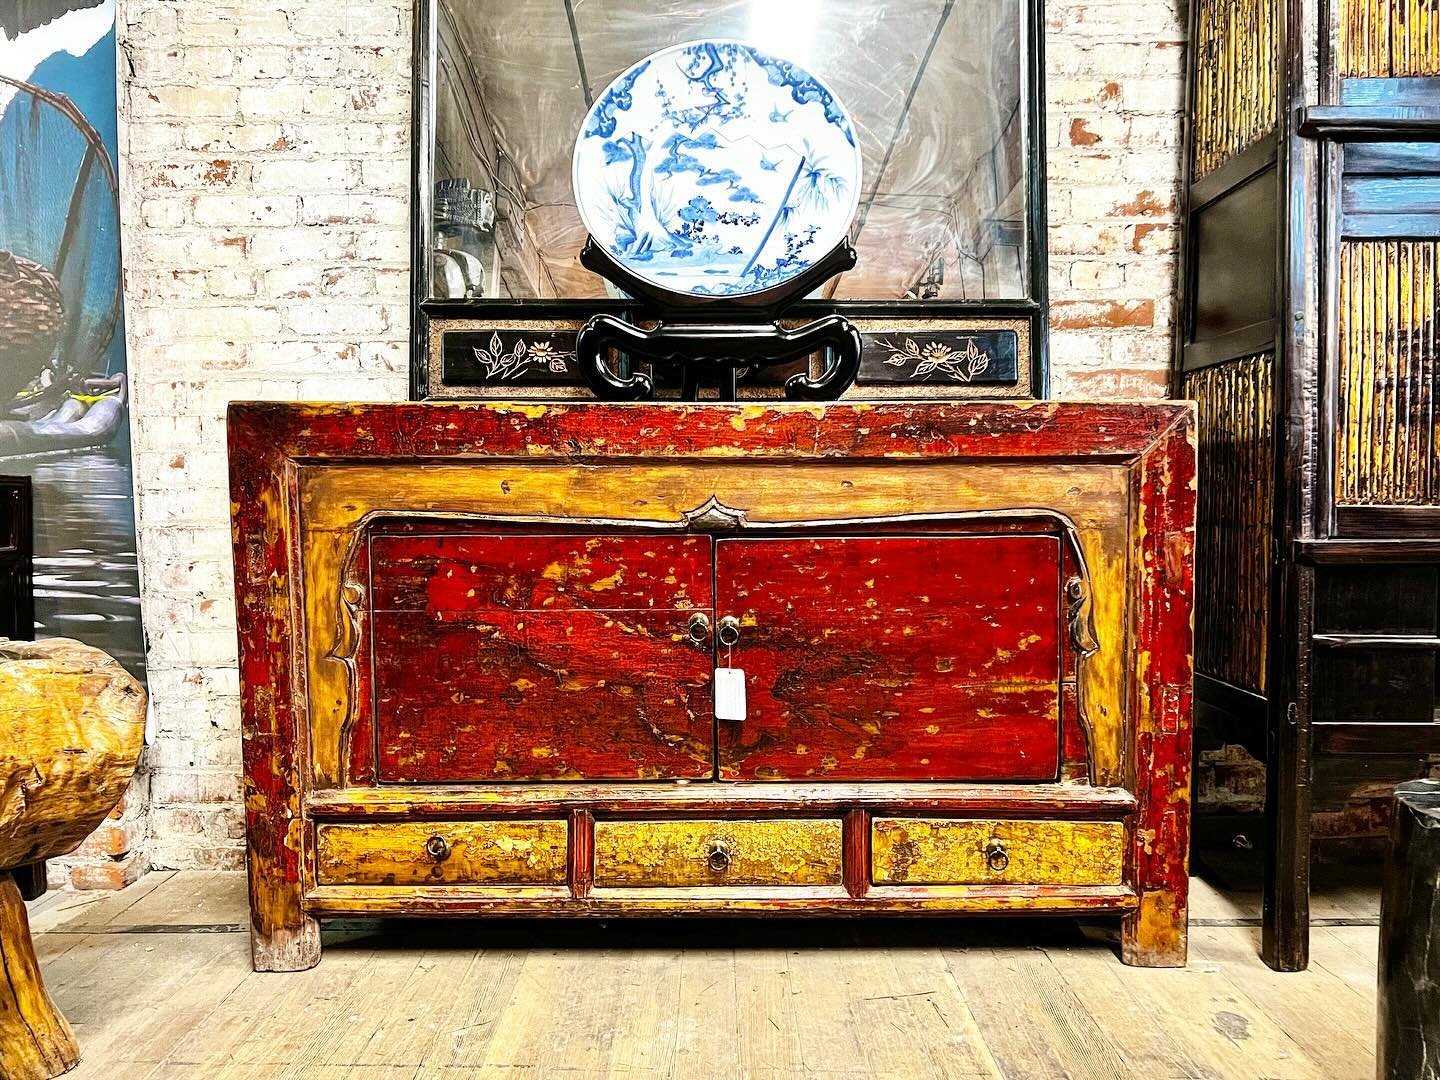 Rustic Mongolian cabinet from Ulaanbaatar. Two large doors and three drawers lacquered in an aging brick red and saffron gold. c. 1910. Dimensions: L 57&rdquo; D 18&rdquo; H 35&rdquo;. #mongolianart #mongolianfurniture #asianart #antiqueasianfurnitur